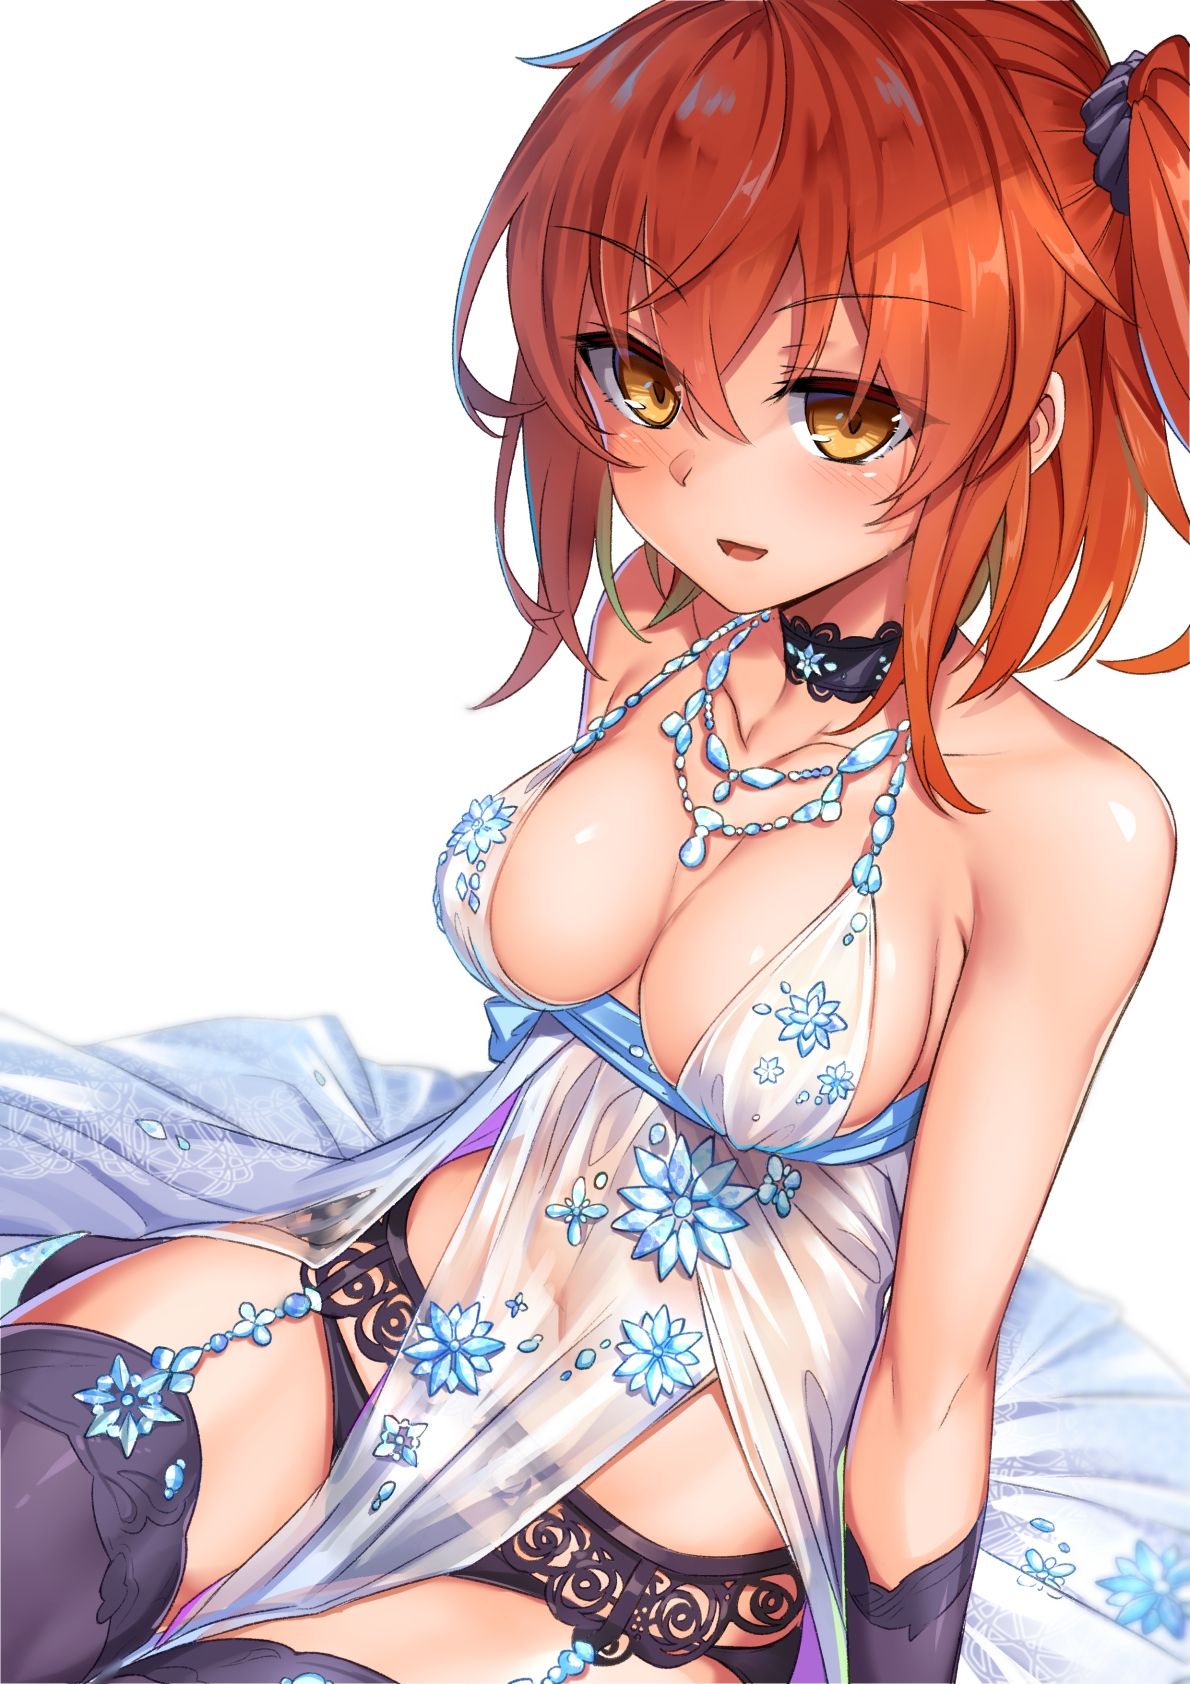 【Erotic Anime Summary】 Valley erotic images of busty beauties 【50 photos】 3